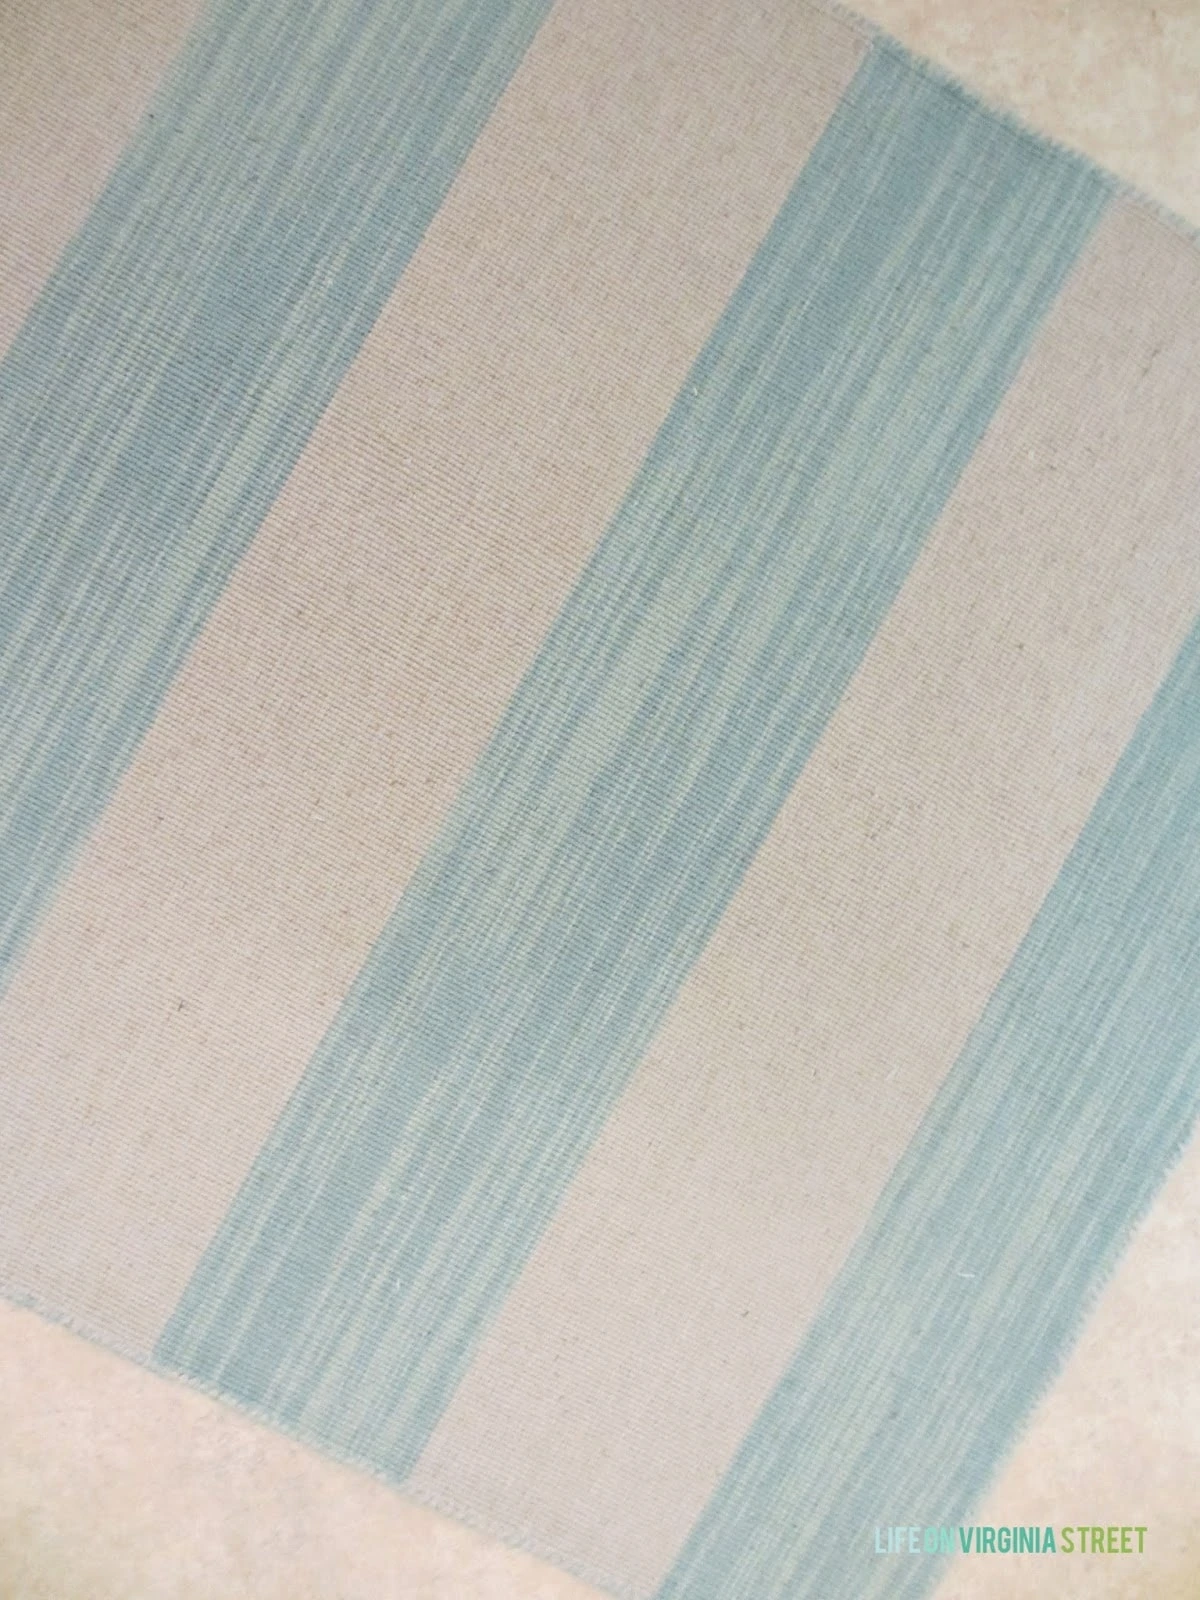 A blue and white striped rug on the floor.